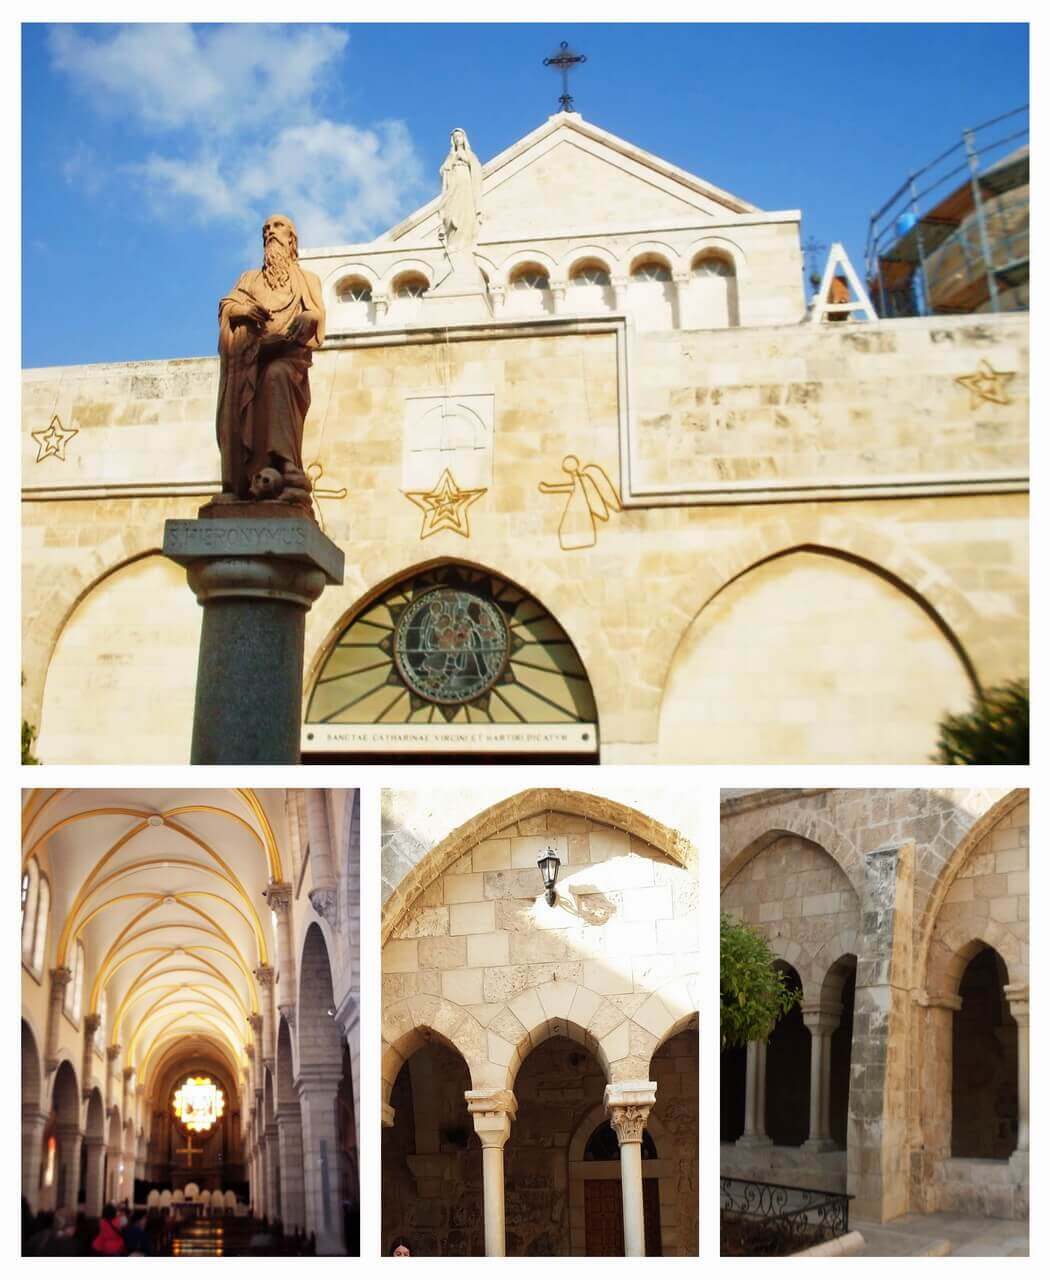 The Church of Saint Catherine, the statue of St. Jerome and the cloister, and the statue of St. Catherine